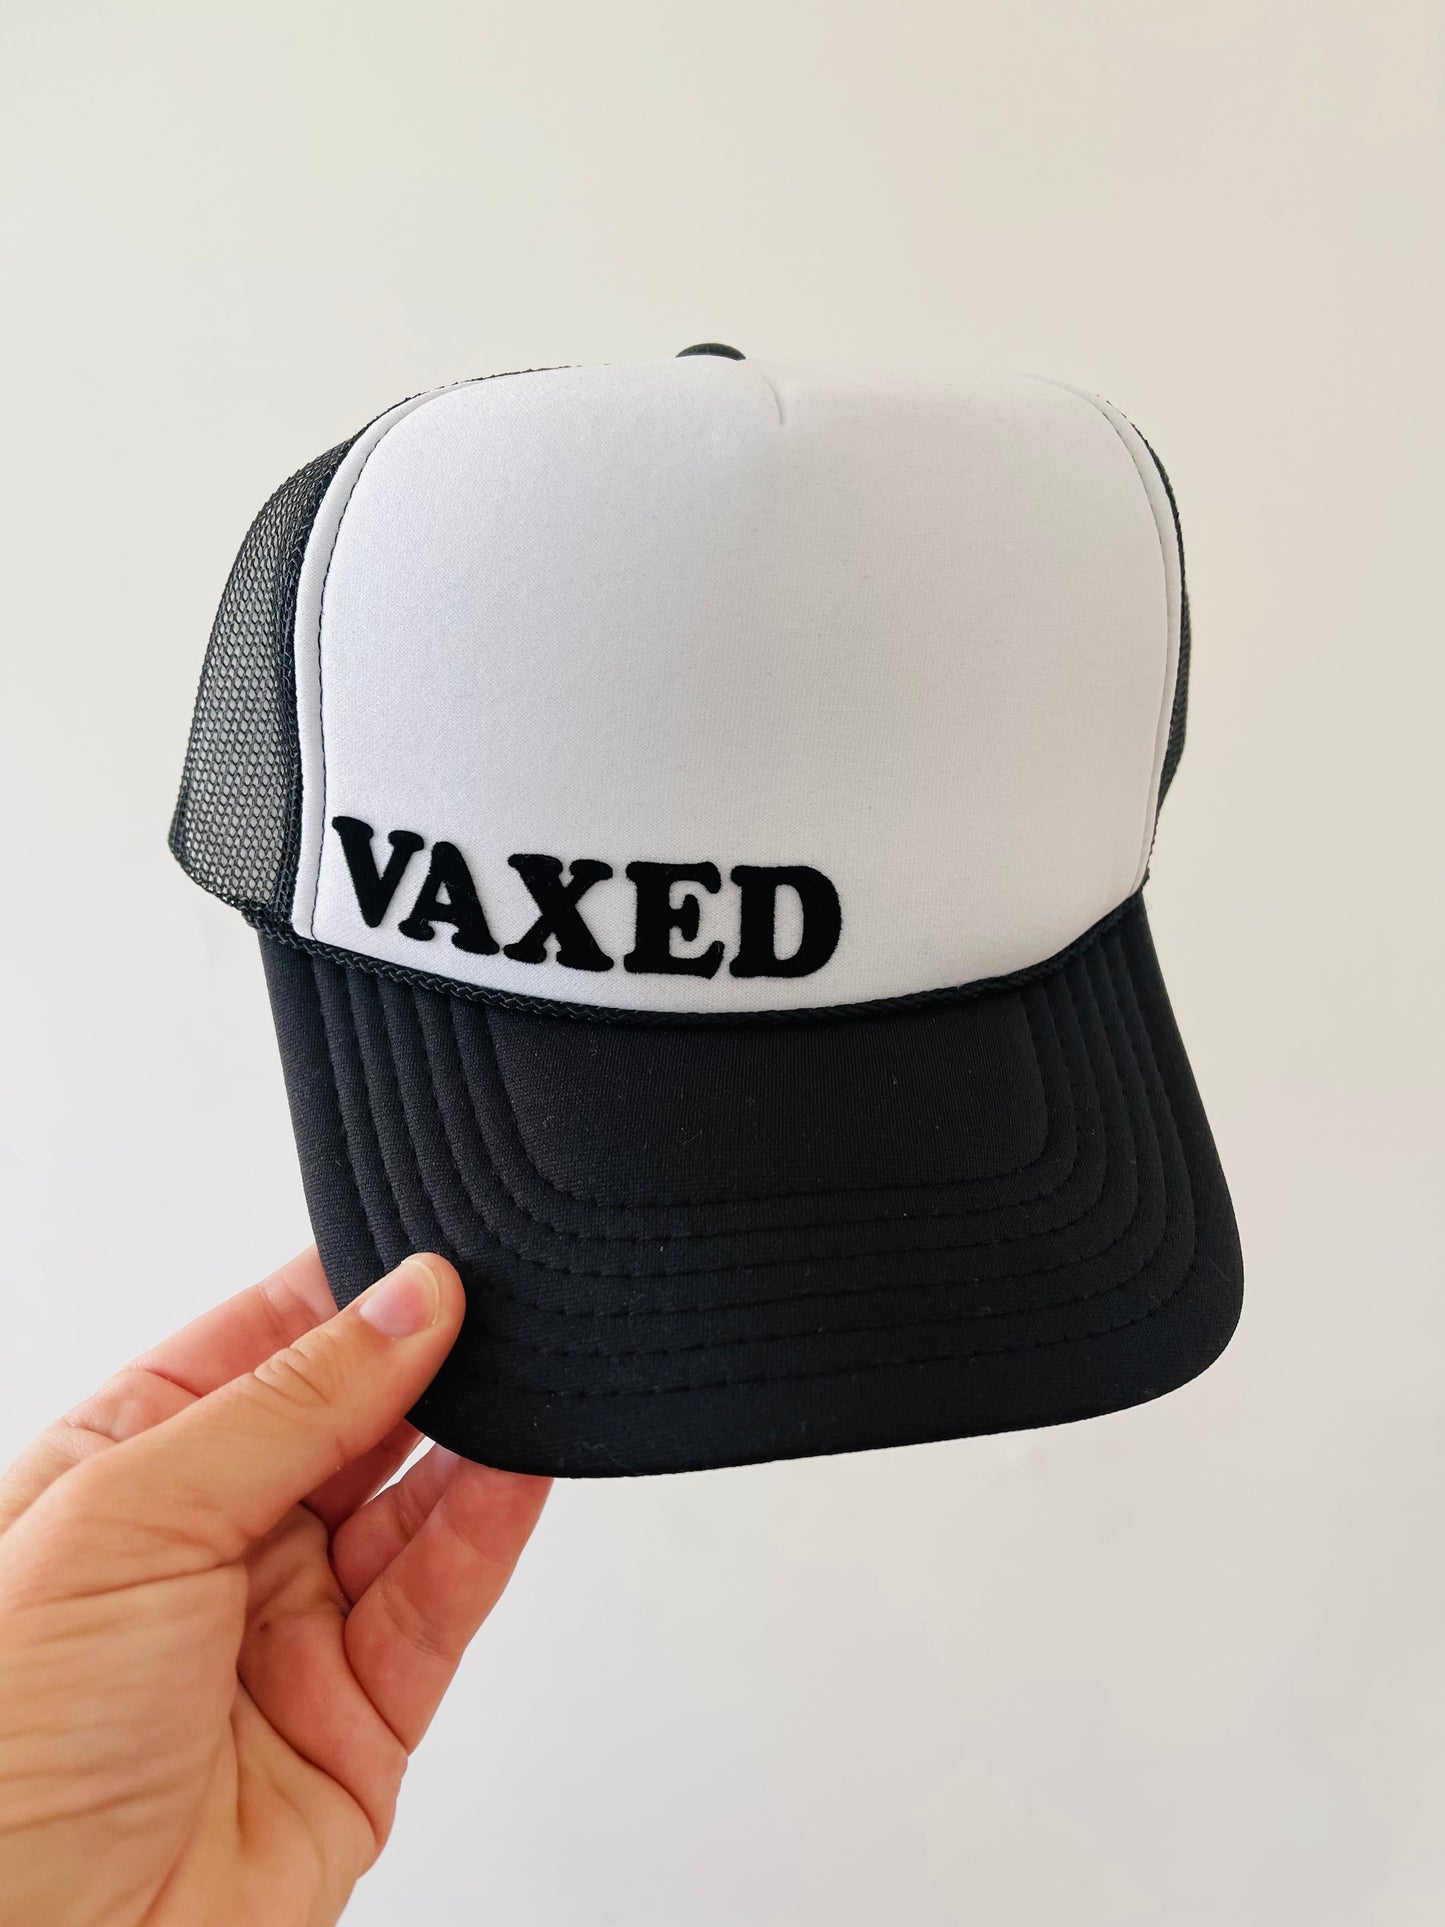 The subtle VAXED